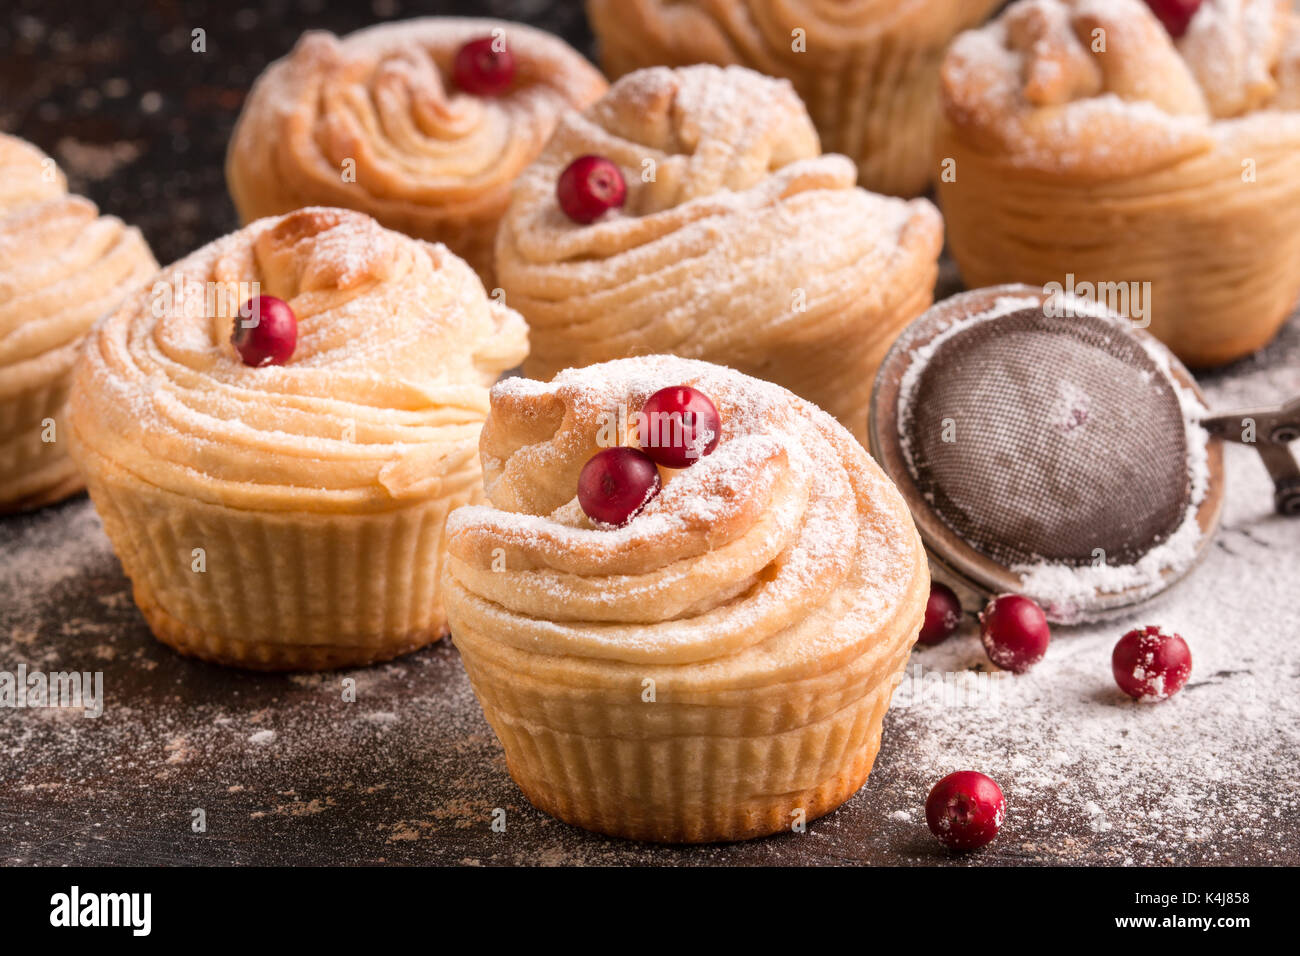 Delicious Cruffins come-together of a flaky Croissant in shape of a Muffin. Morning buns. Muffins on dark background. Stock Photo